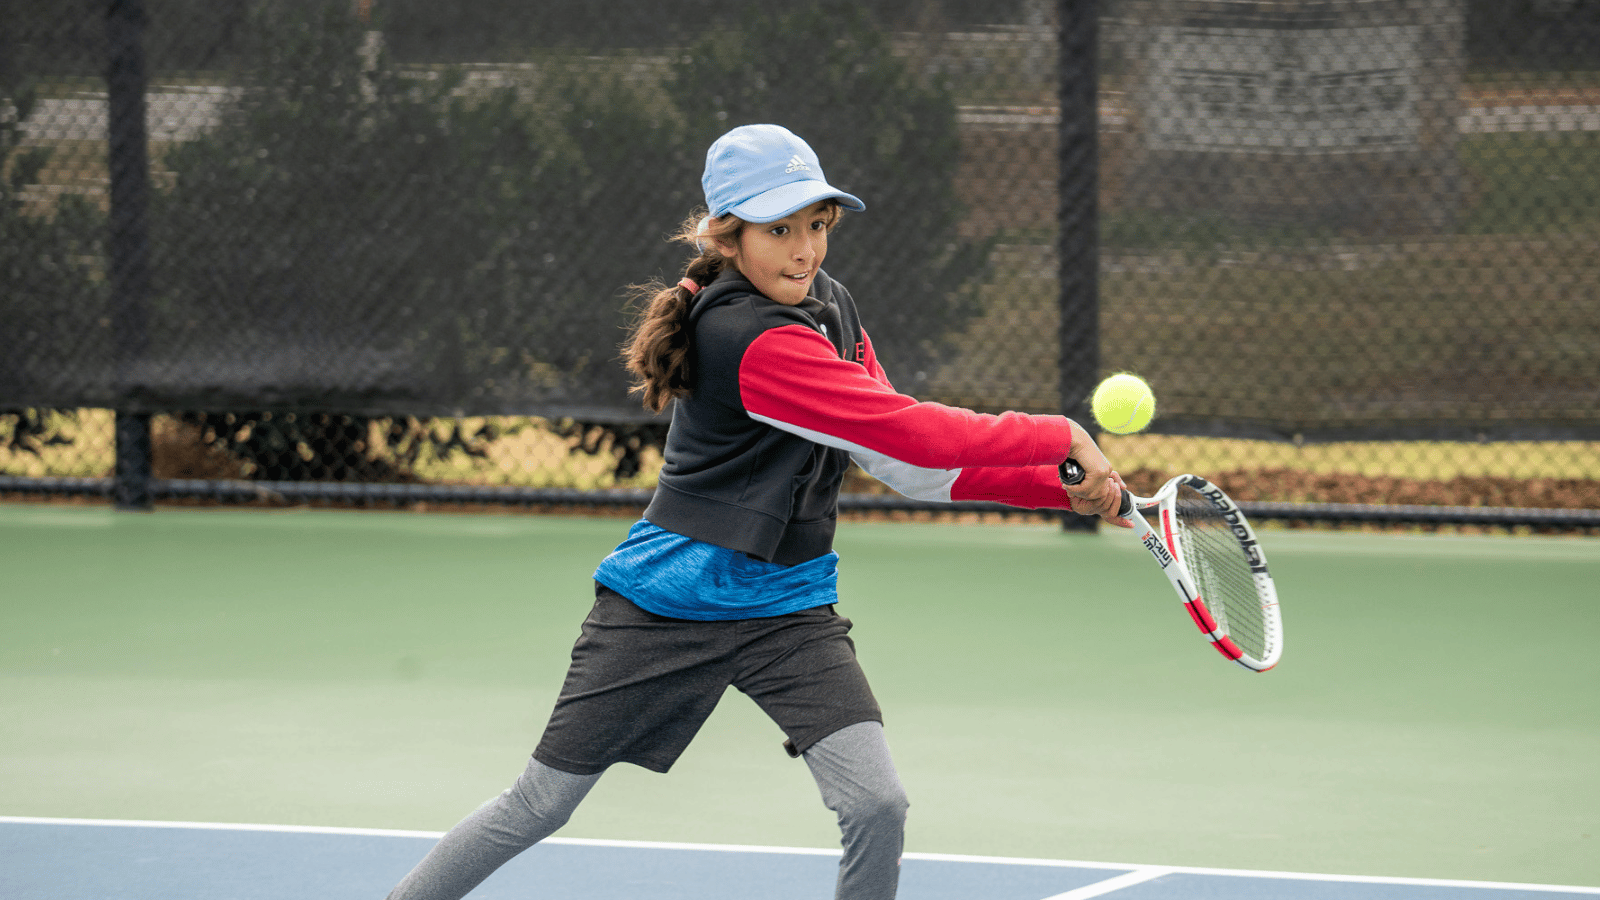 A young girl hits a backhand on a tennis court.